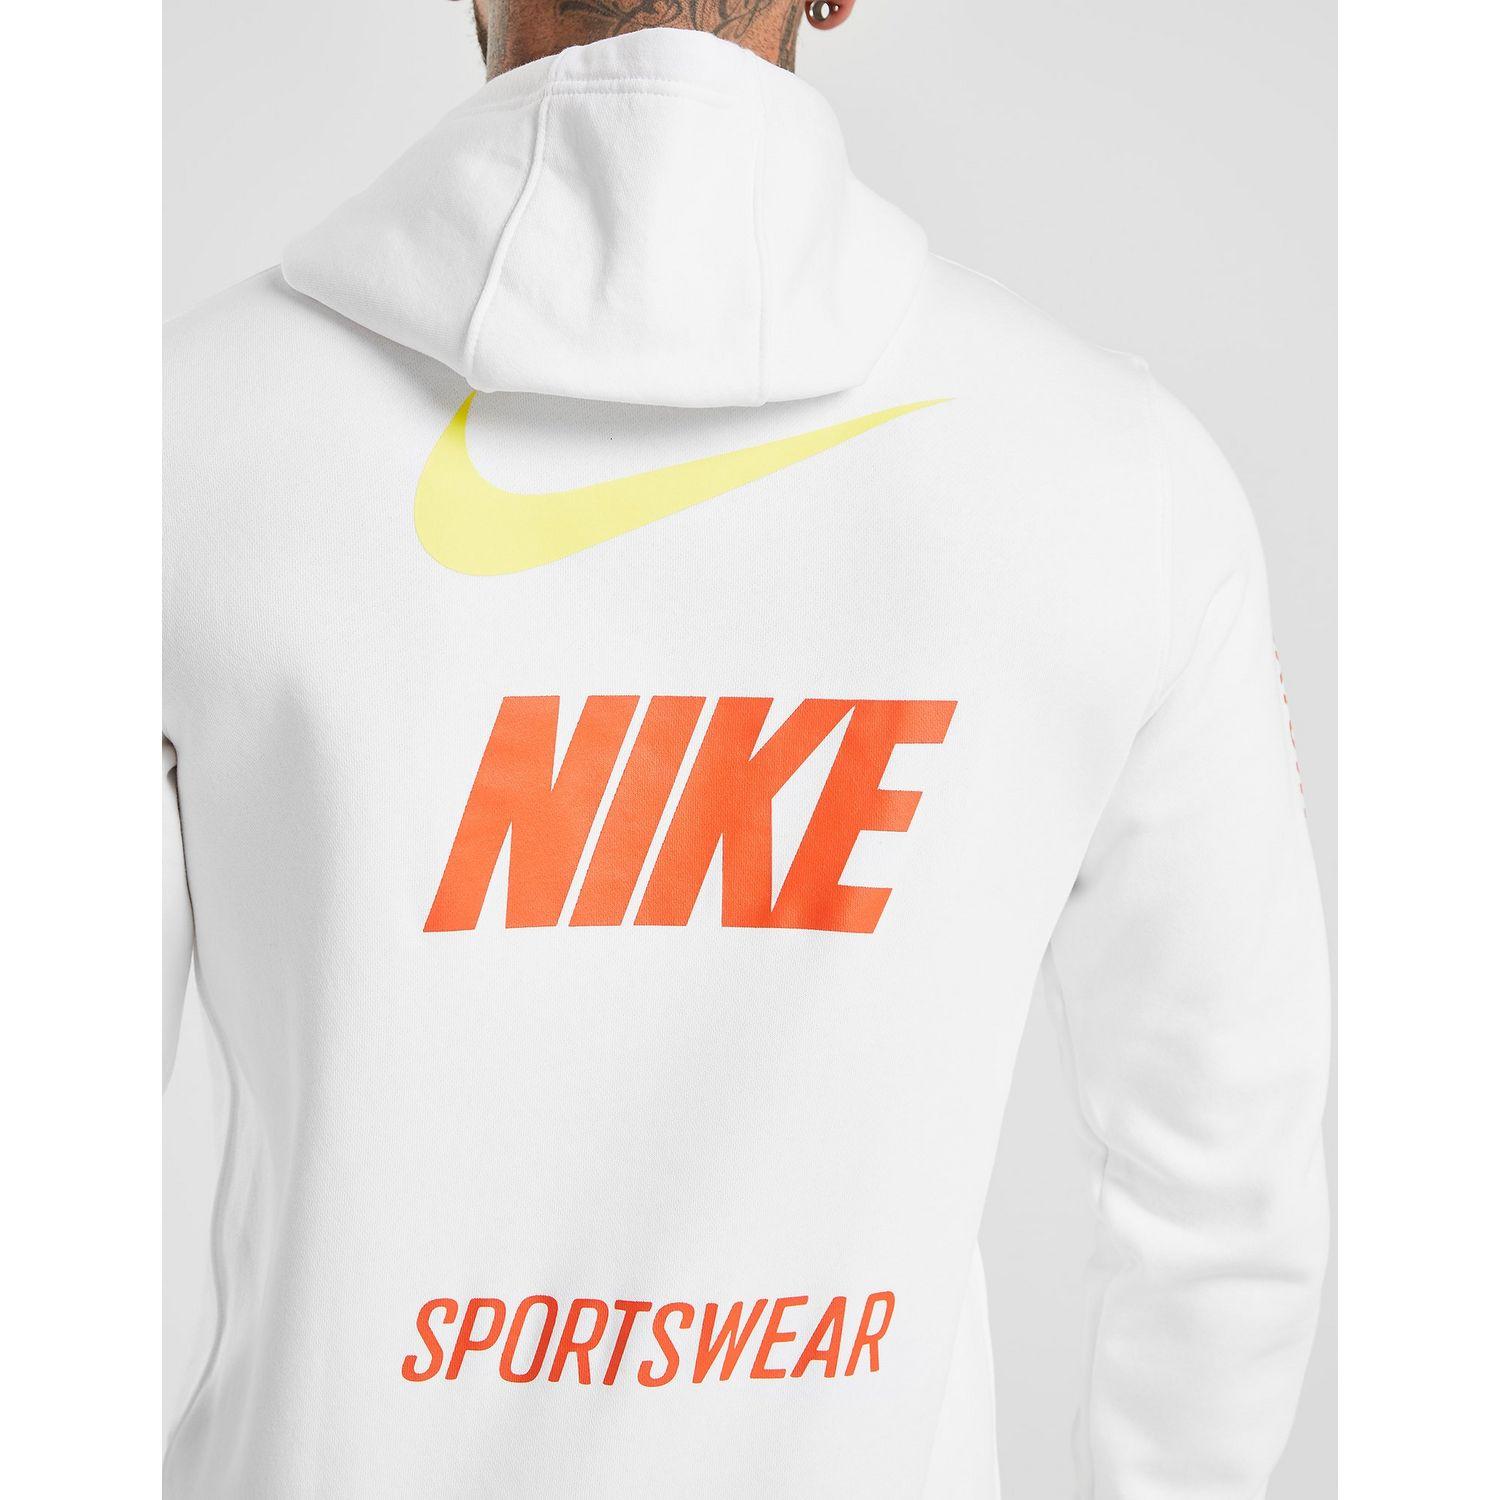 Nike Cotton Overbrand Overhead Hoodie in White/Orange/Yellow (White) for  Men - Lyst